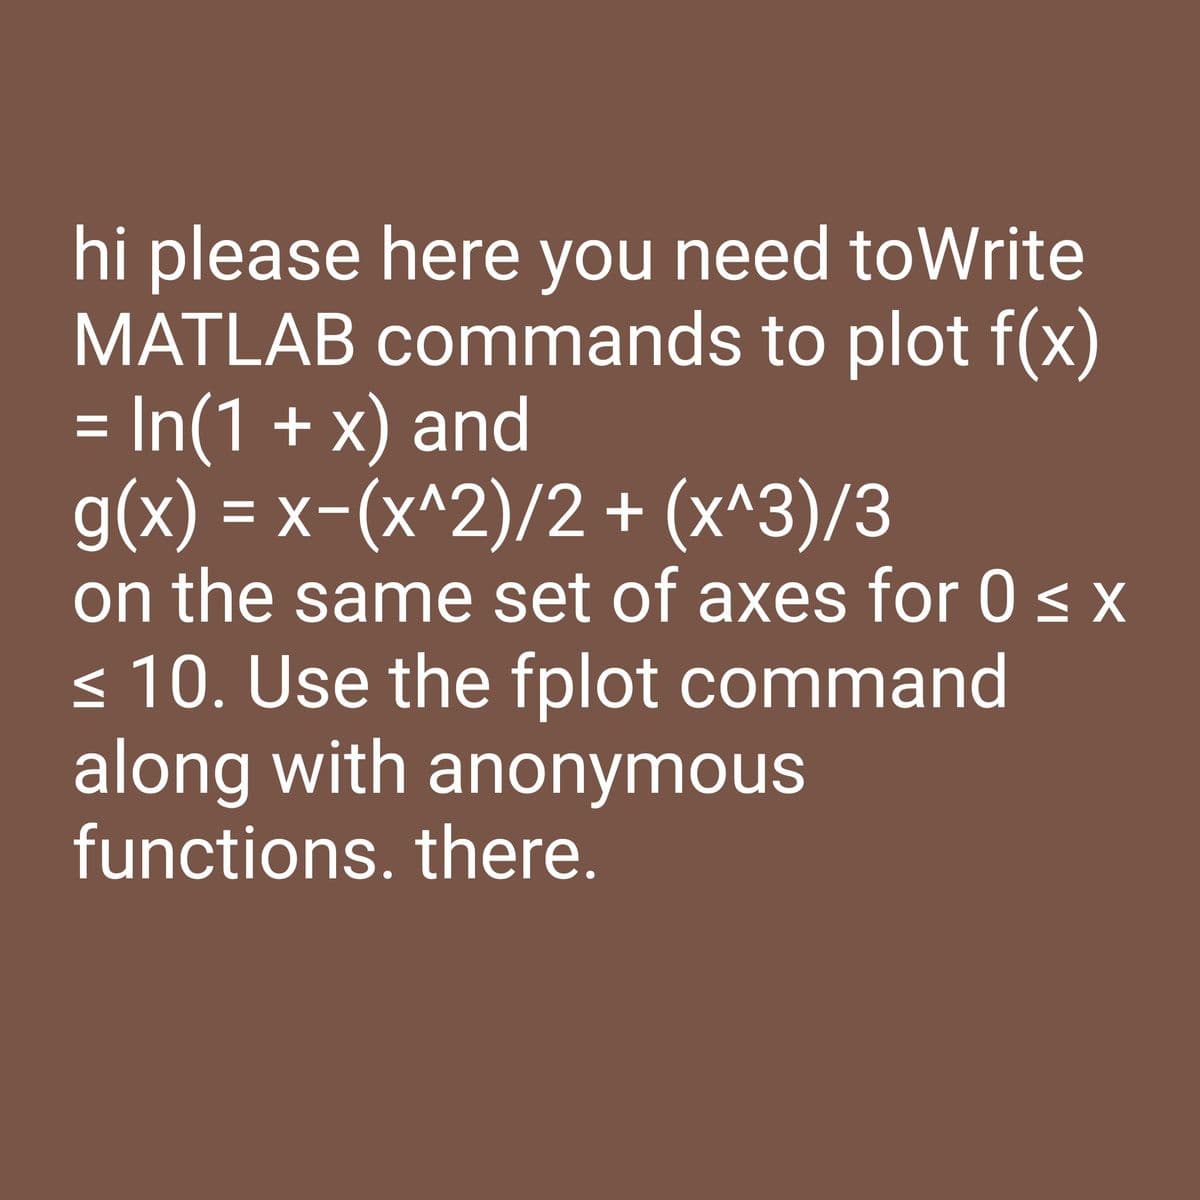 hi please here you need toWrite
MATLAB commands to plot f(x)
= In(1 + x) and
g(x) = x-(x^2)/2 + (x^3)/3
on the same set of axes for 0 ≤ x
≤ 10. Use the fplot command
along with anonymous
functions. there.